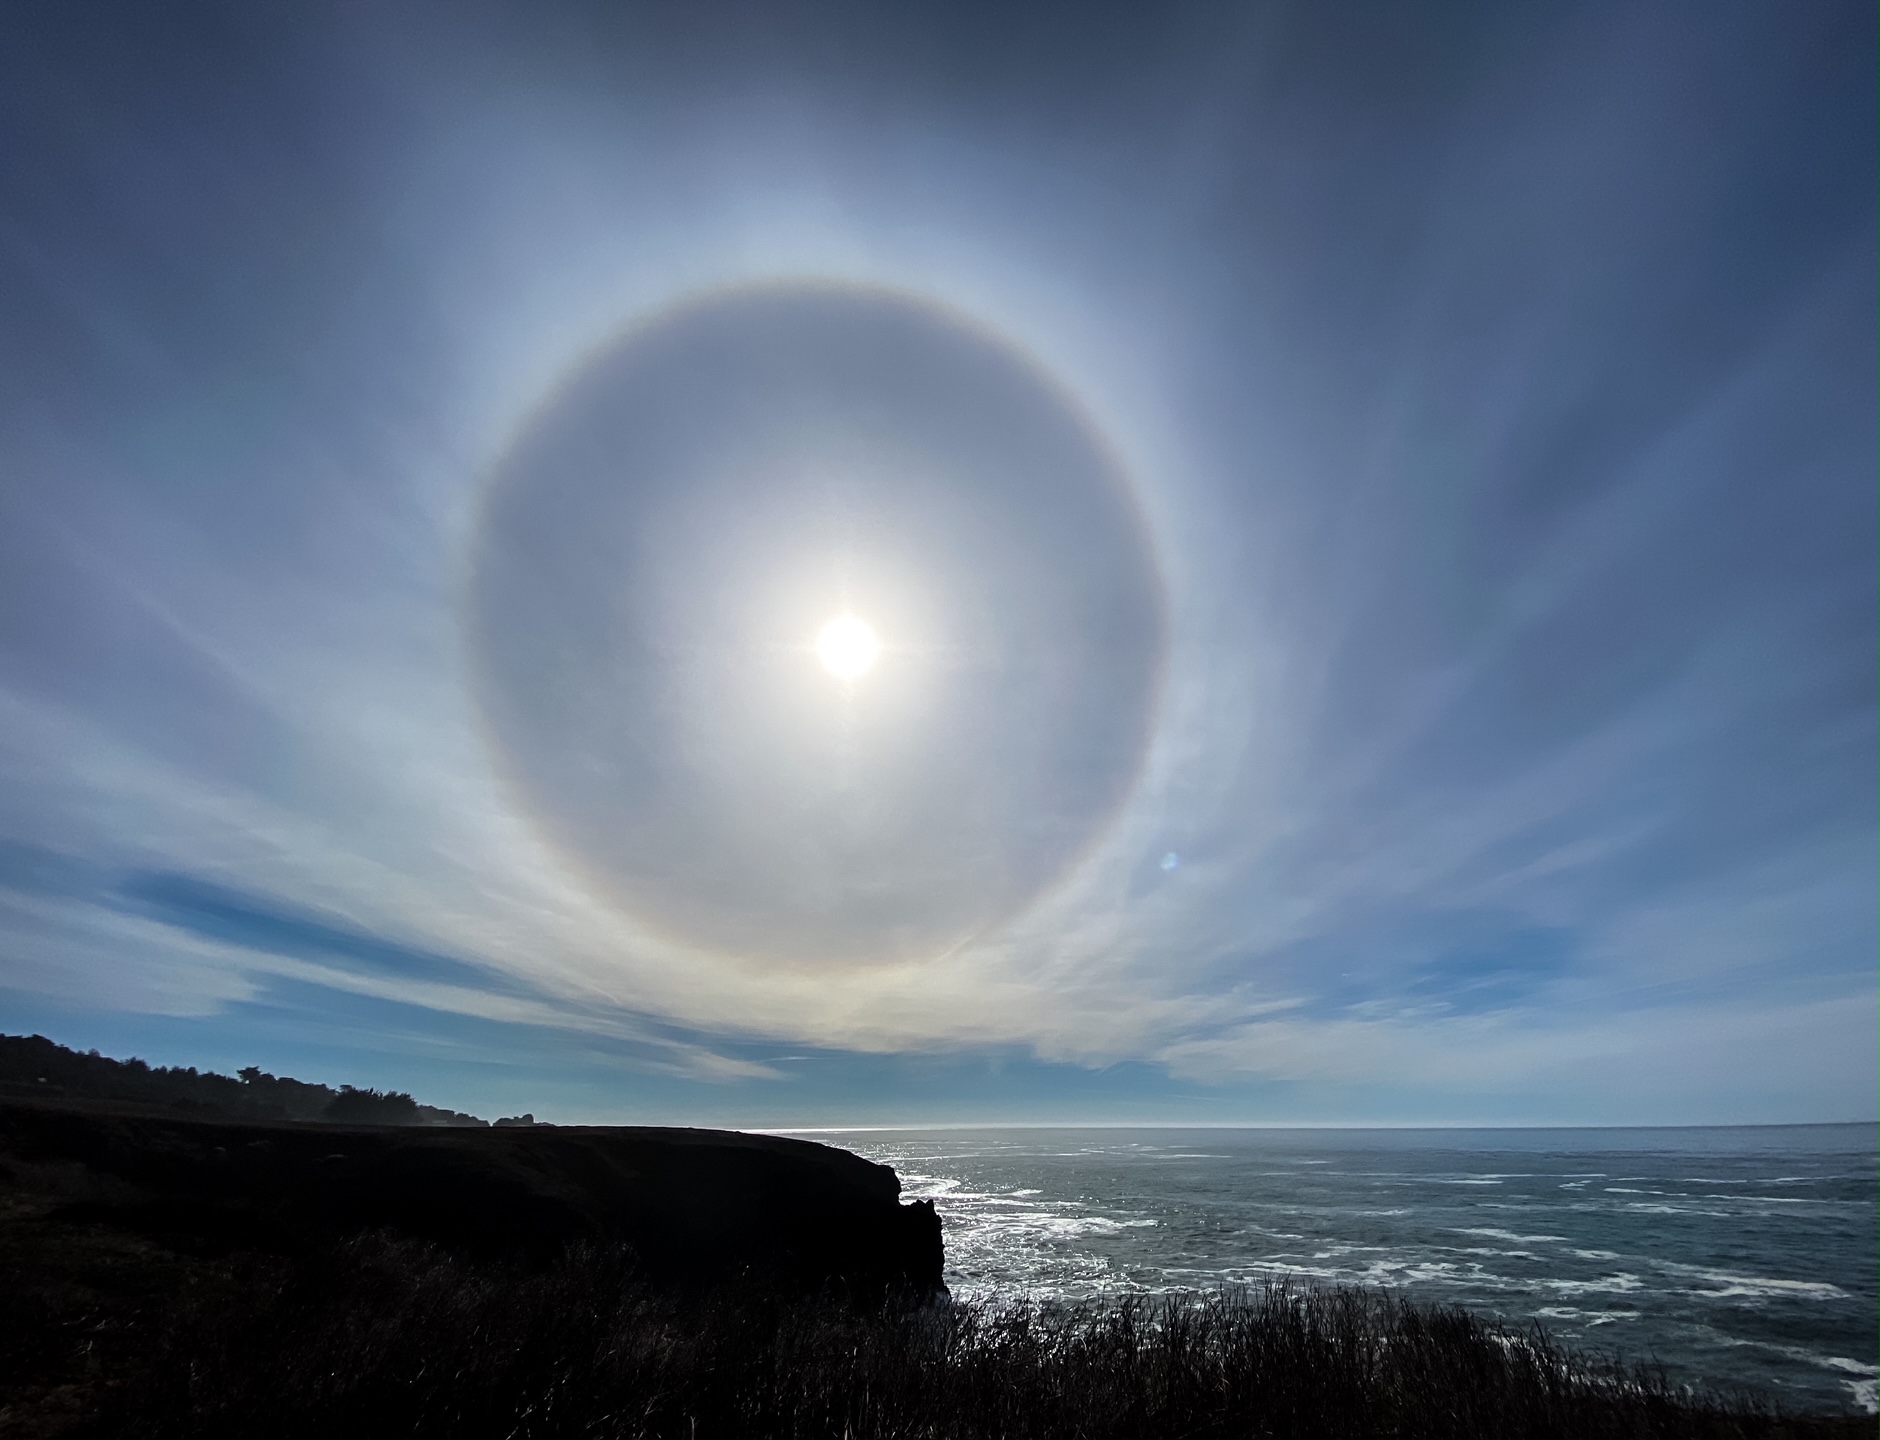 A wow moment a Halo around the Sun, as photographed by Shari Goforth